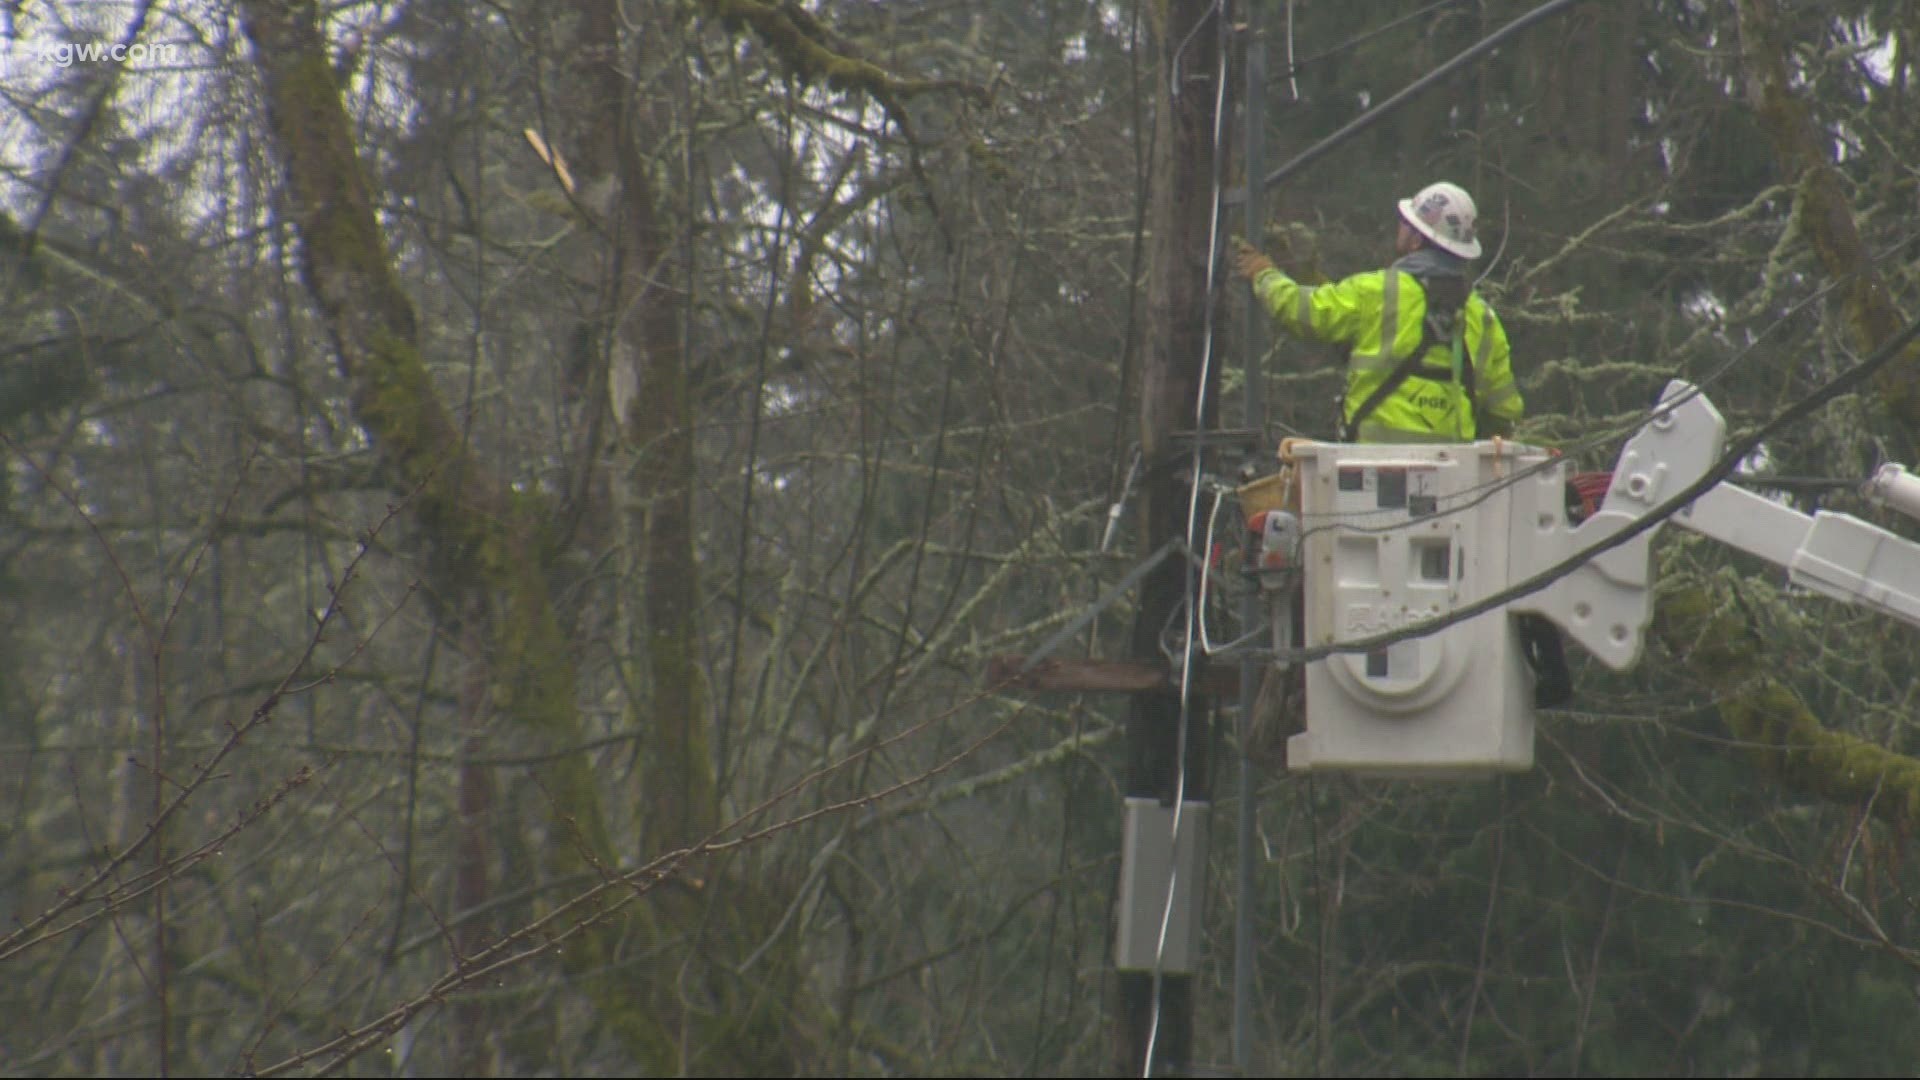 PGE says most people will have their power back by Friday. Tim Gordon has the latest on the effort to restore electricity to thousands.